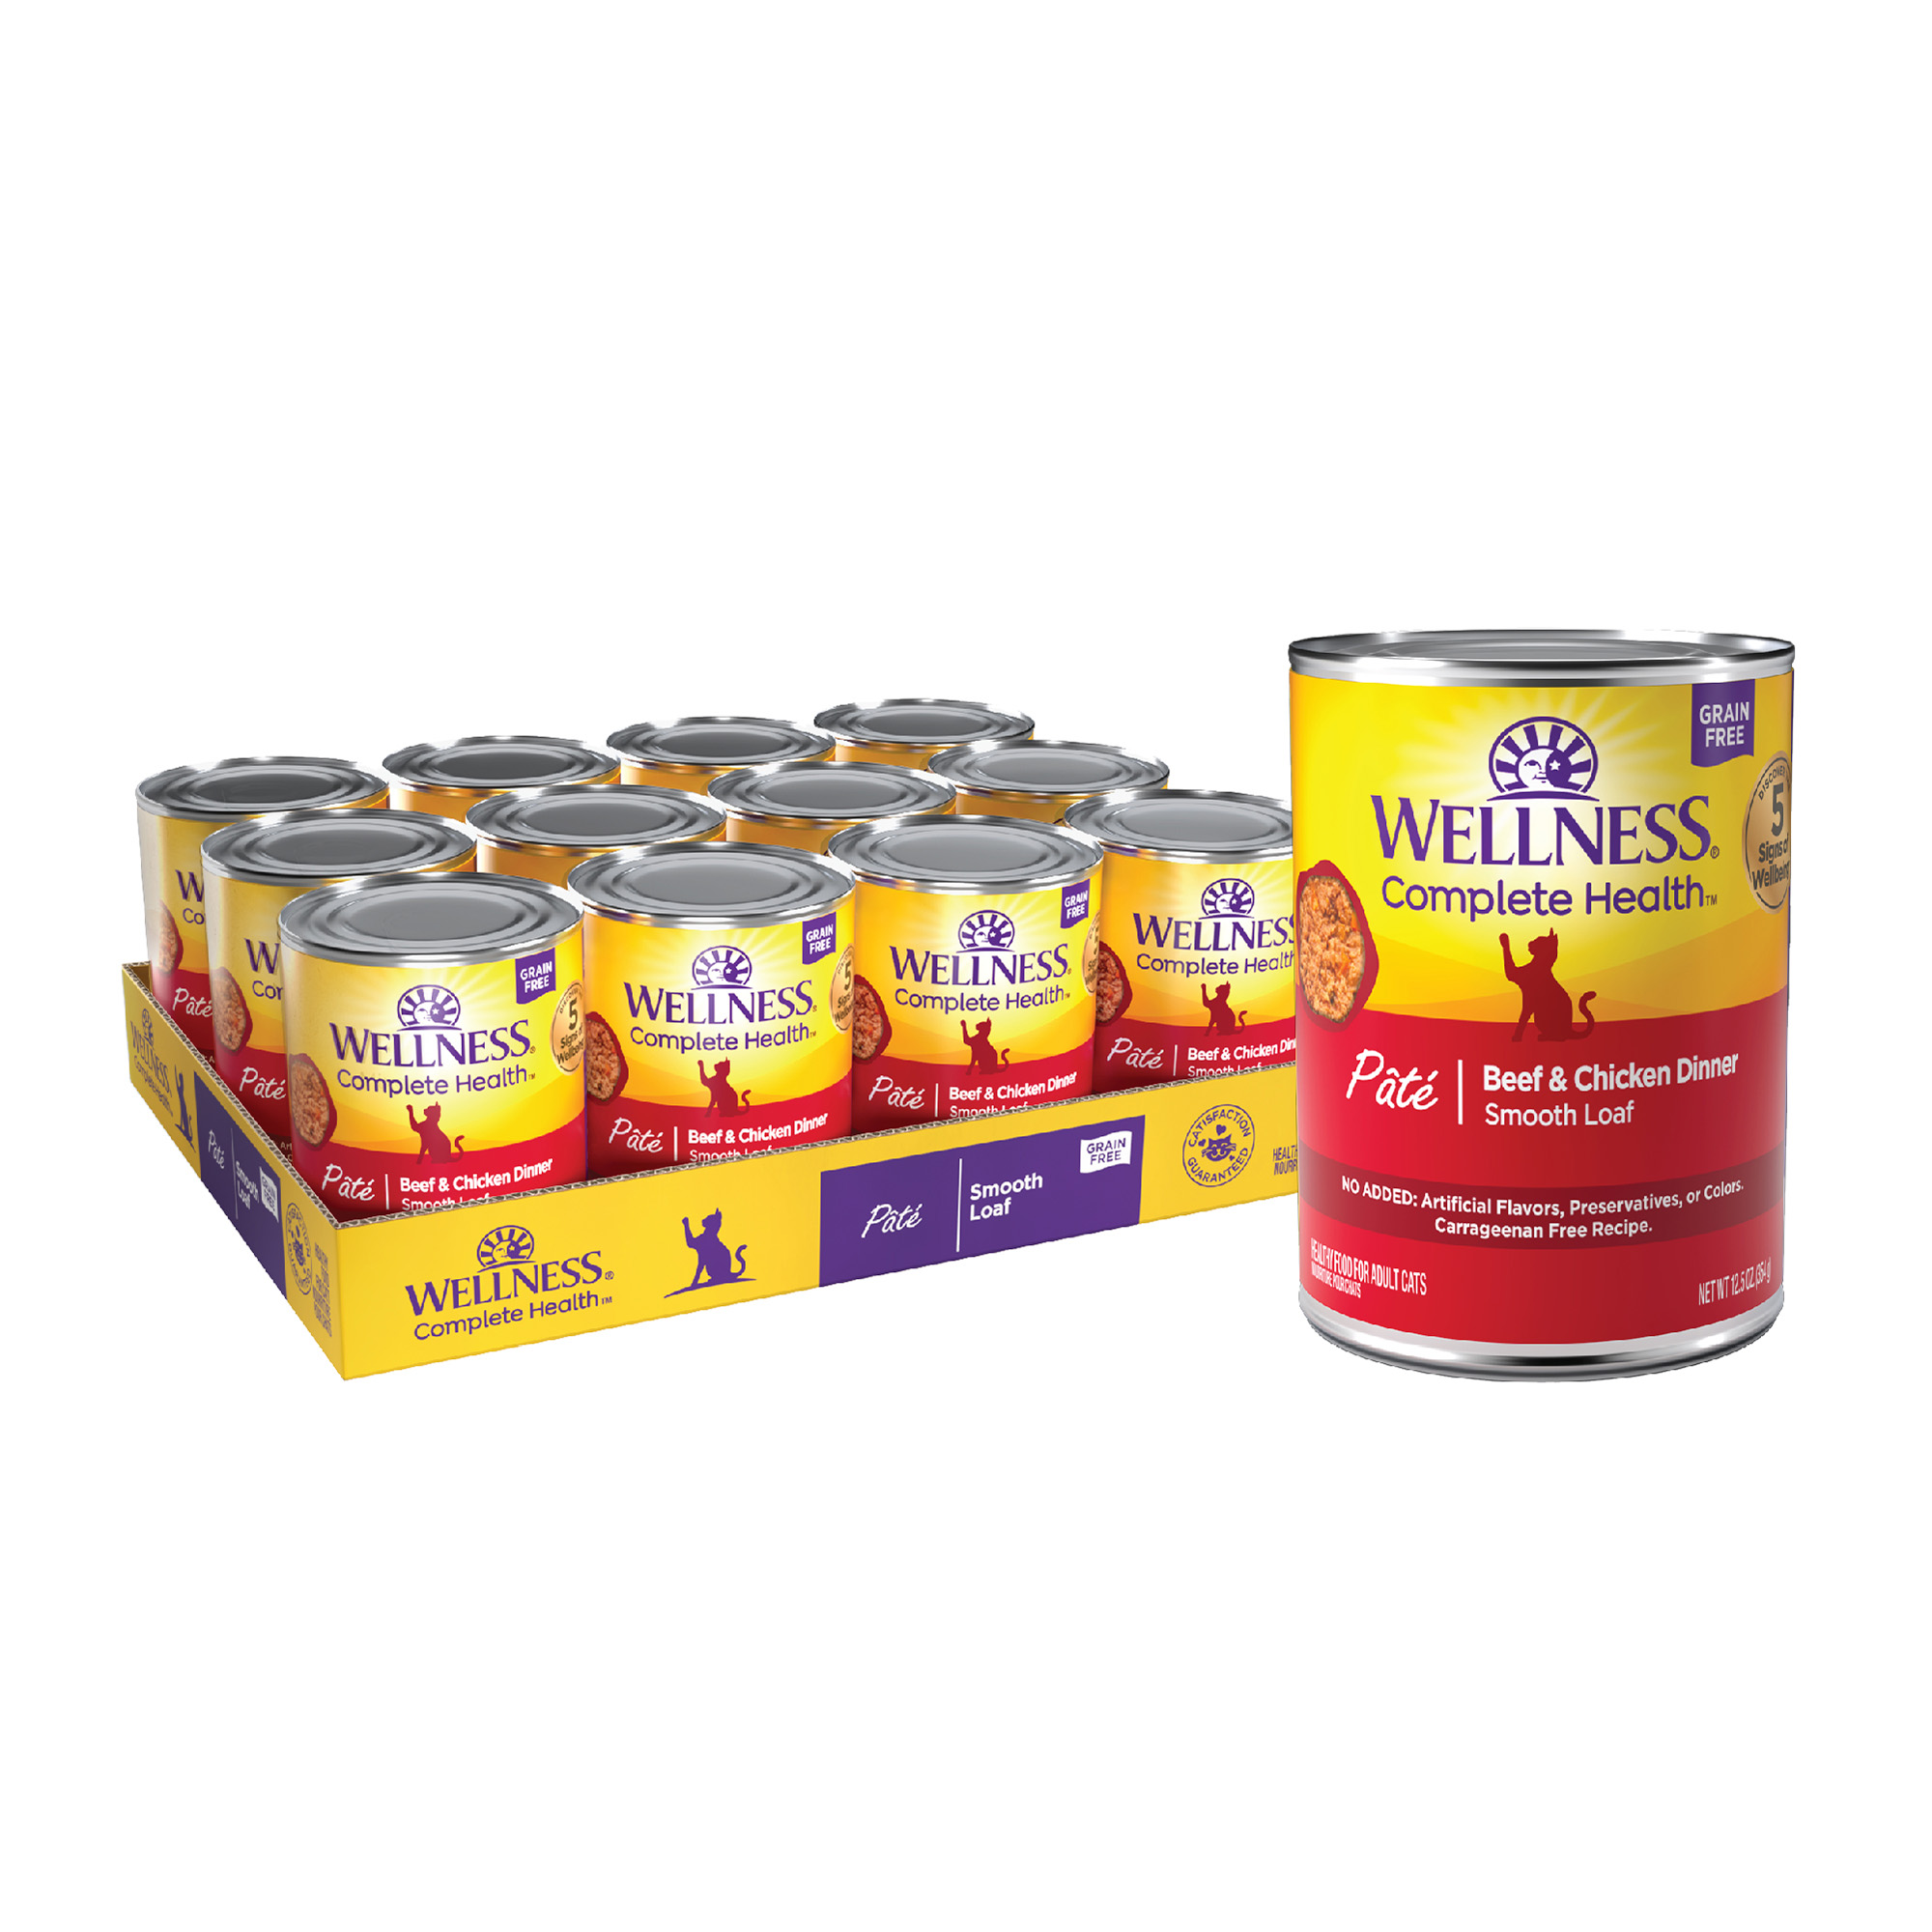 Wellness Complete Health Natural Grain Free Wet Canned Cat Food, Beef & Chicken Pate, 12.5 Ounce Can (Pack of 12) - image 1 of 9